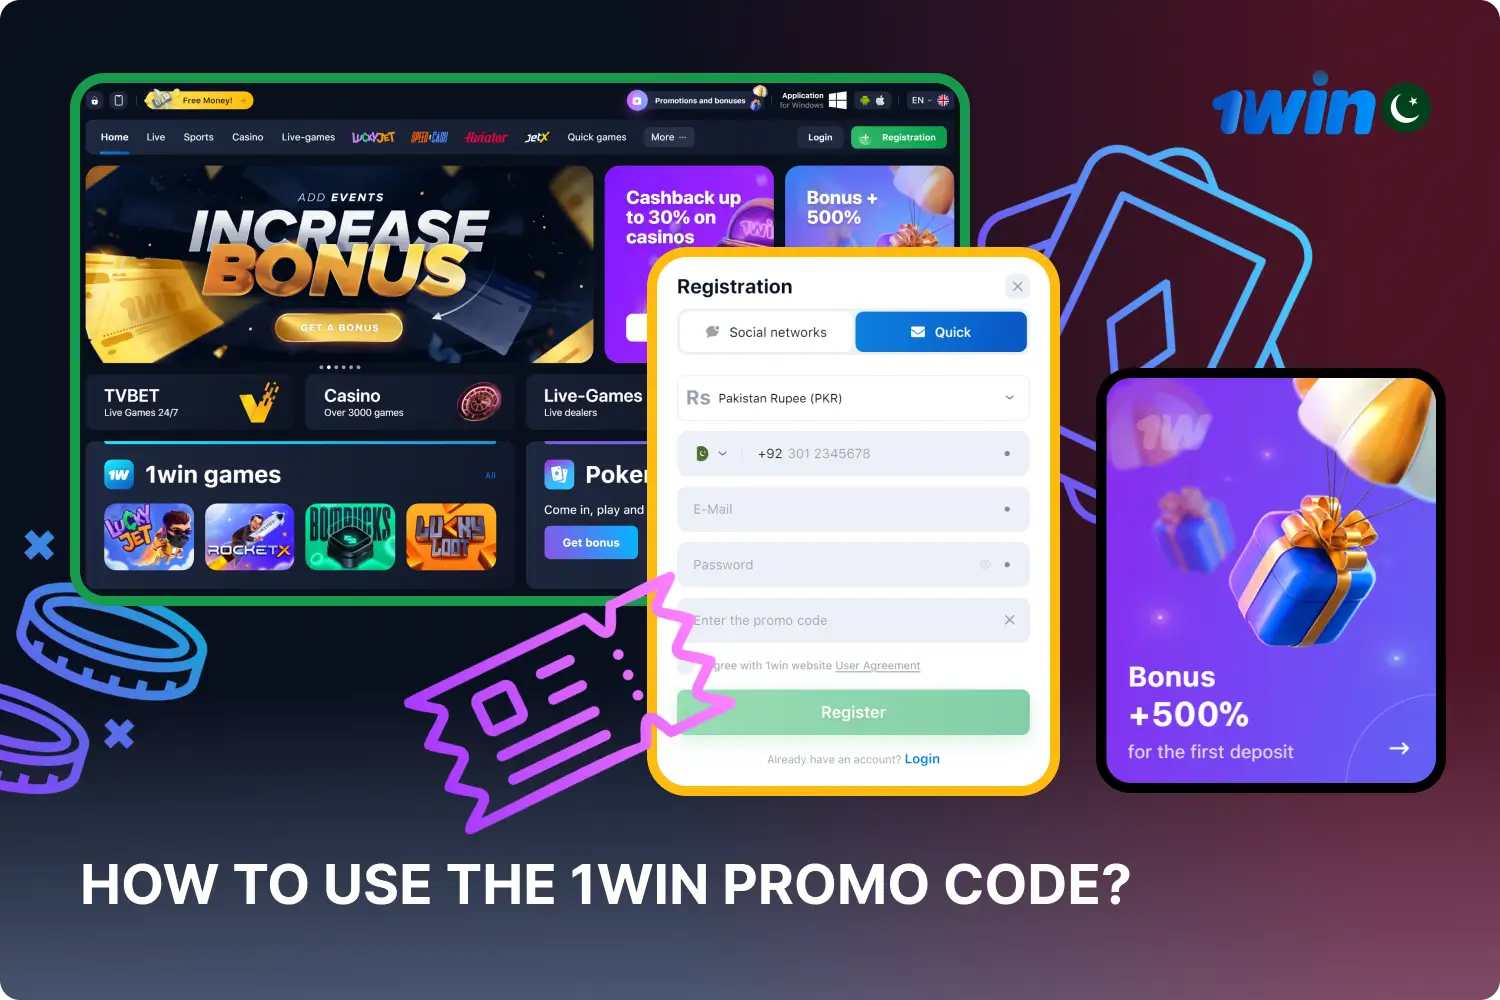 To get bonuses using 1win promo code, users in Pakistan need to follow a few simple steps